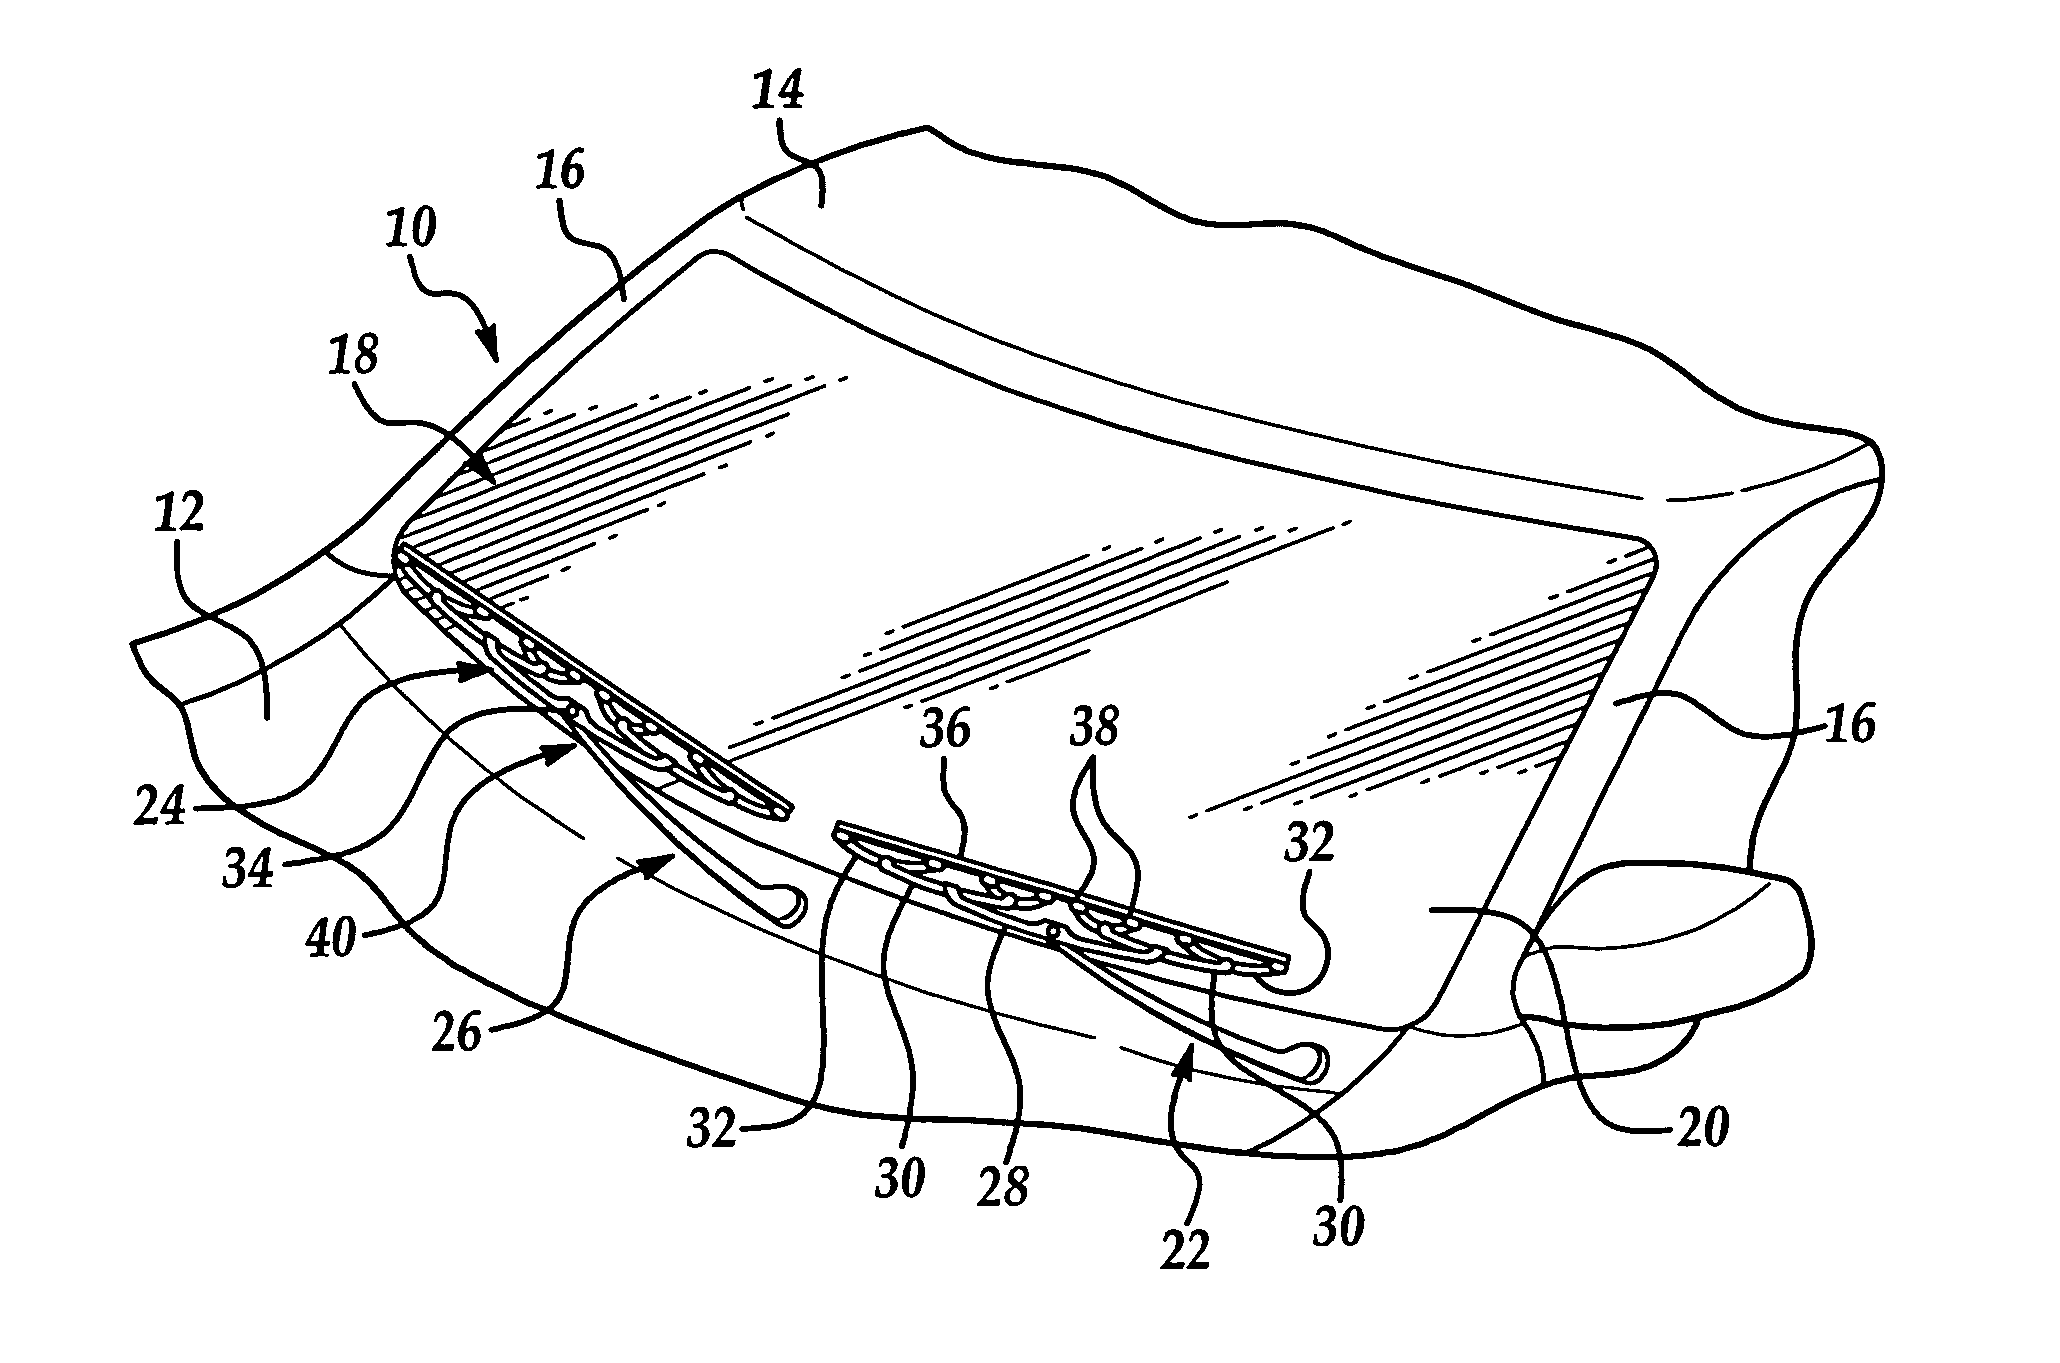 Universal wiper adapter and wiper blade assembly incorporating same